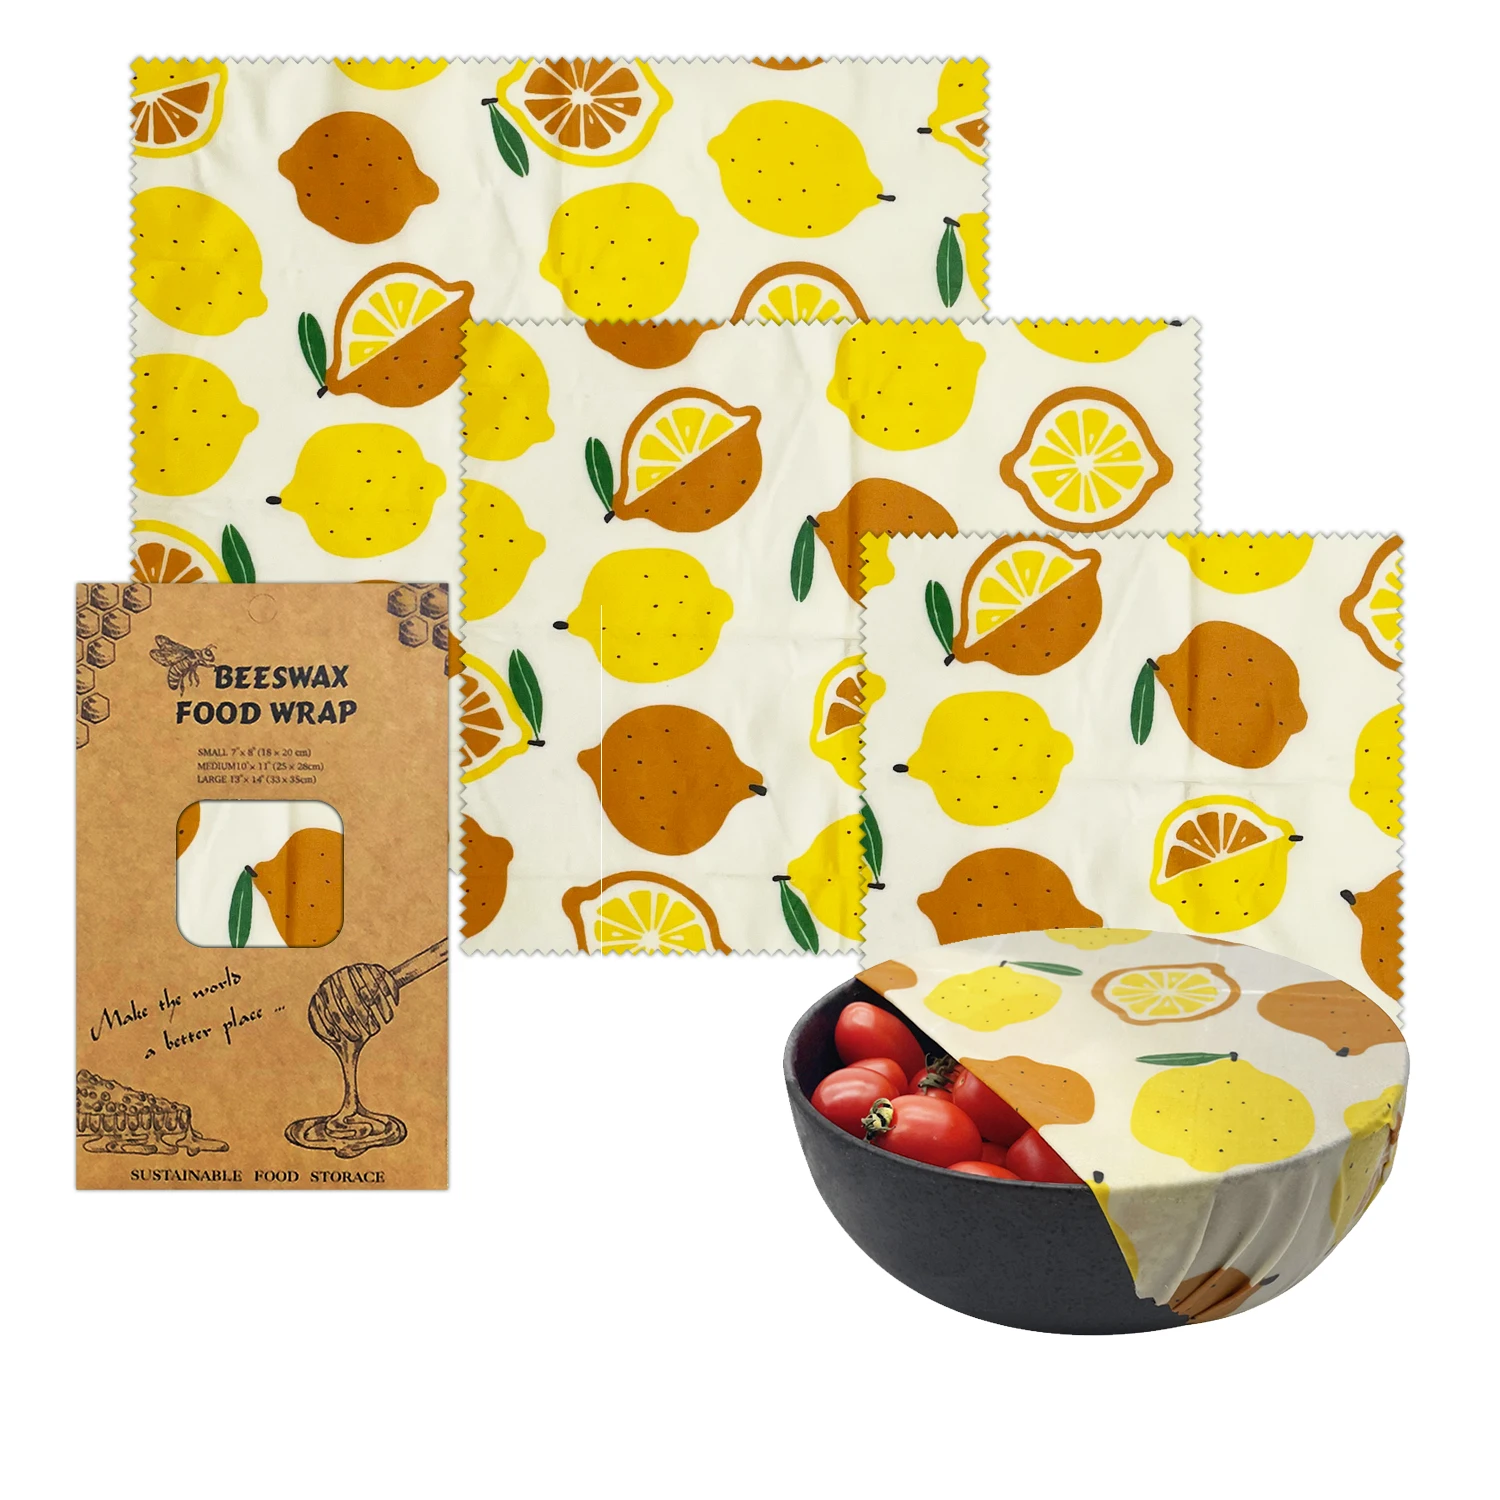 

The Best China reusable beeswax wrap 100% Natural Manufactor Sustainable Zero Waste